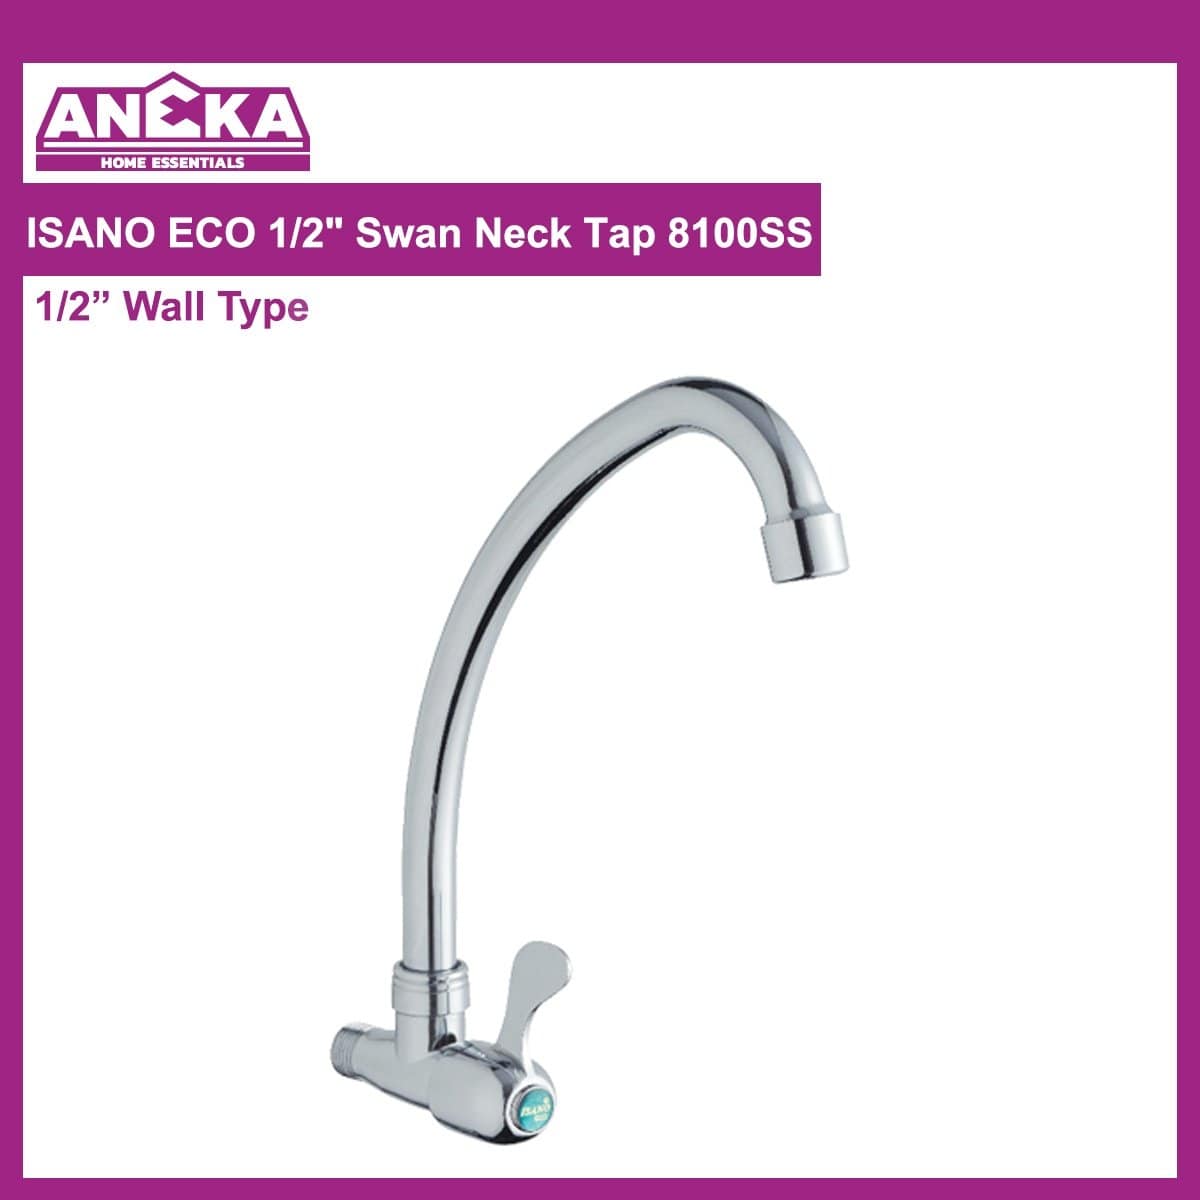 ISANO ECO 1/2"Swan Neck Tap (Wall-Type) 8100SS